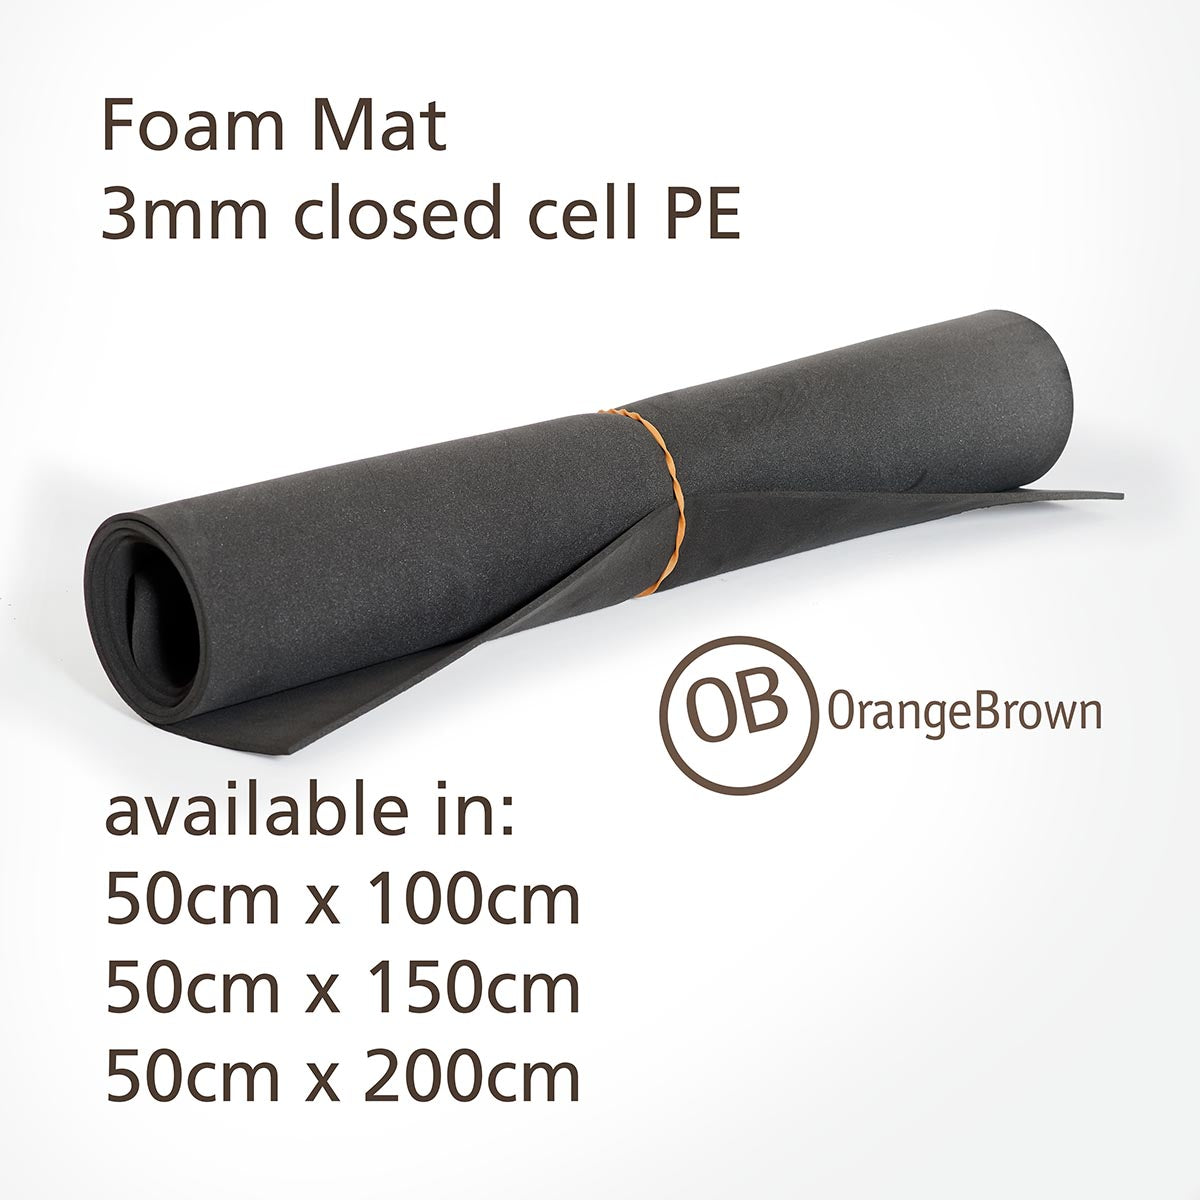 OrangeBrown Foam Mat in 3 mm thickness. For sleeping on or to protect your inflatable sleeping pad.